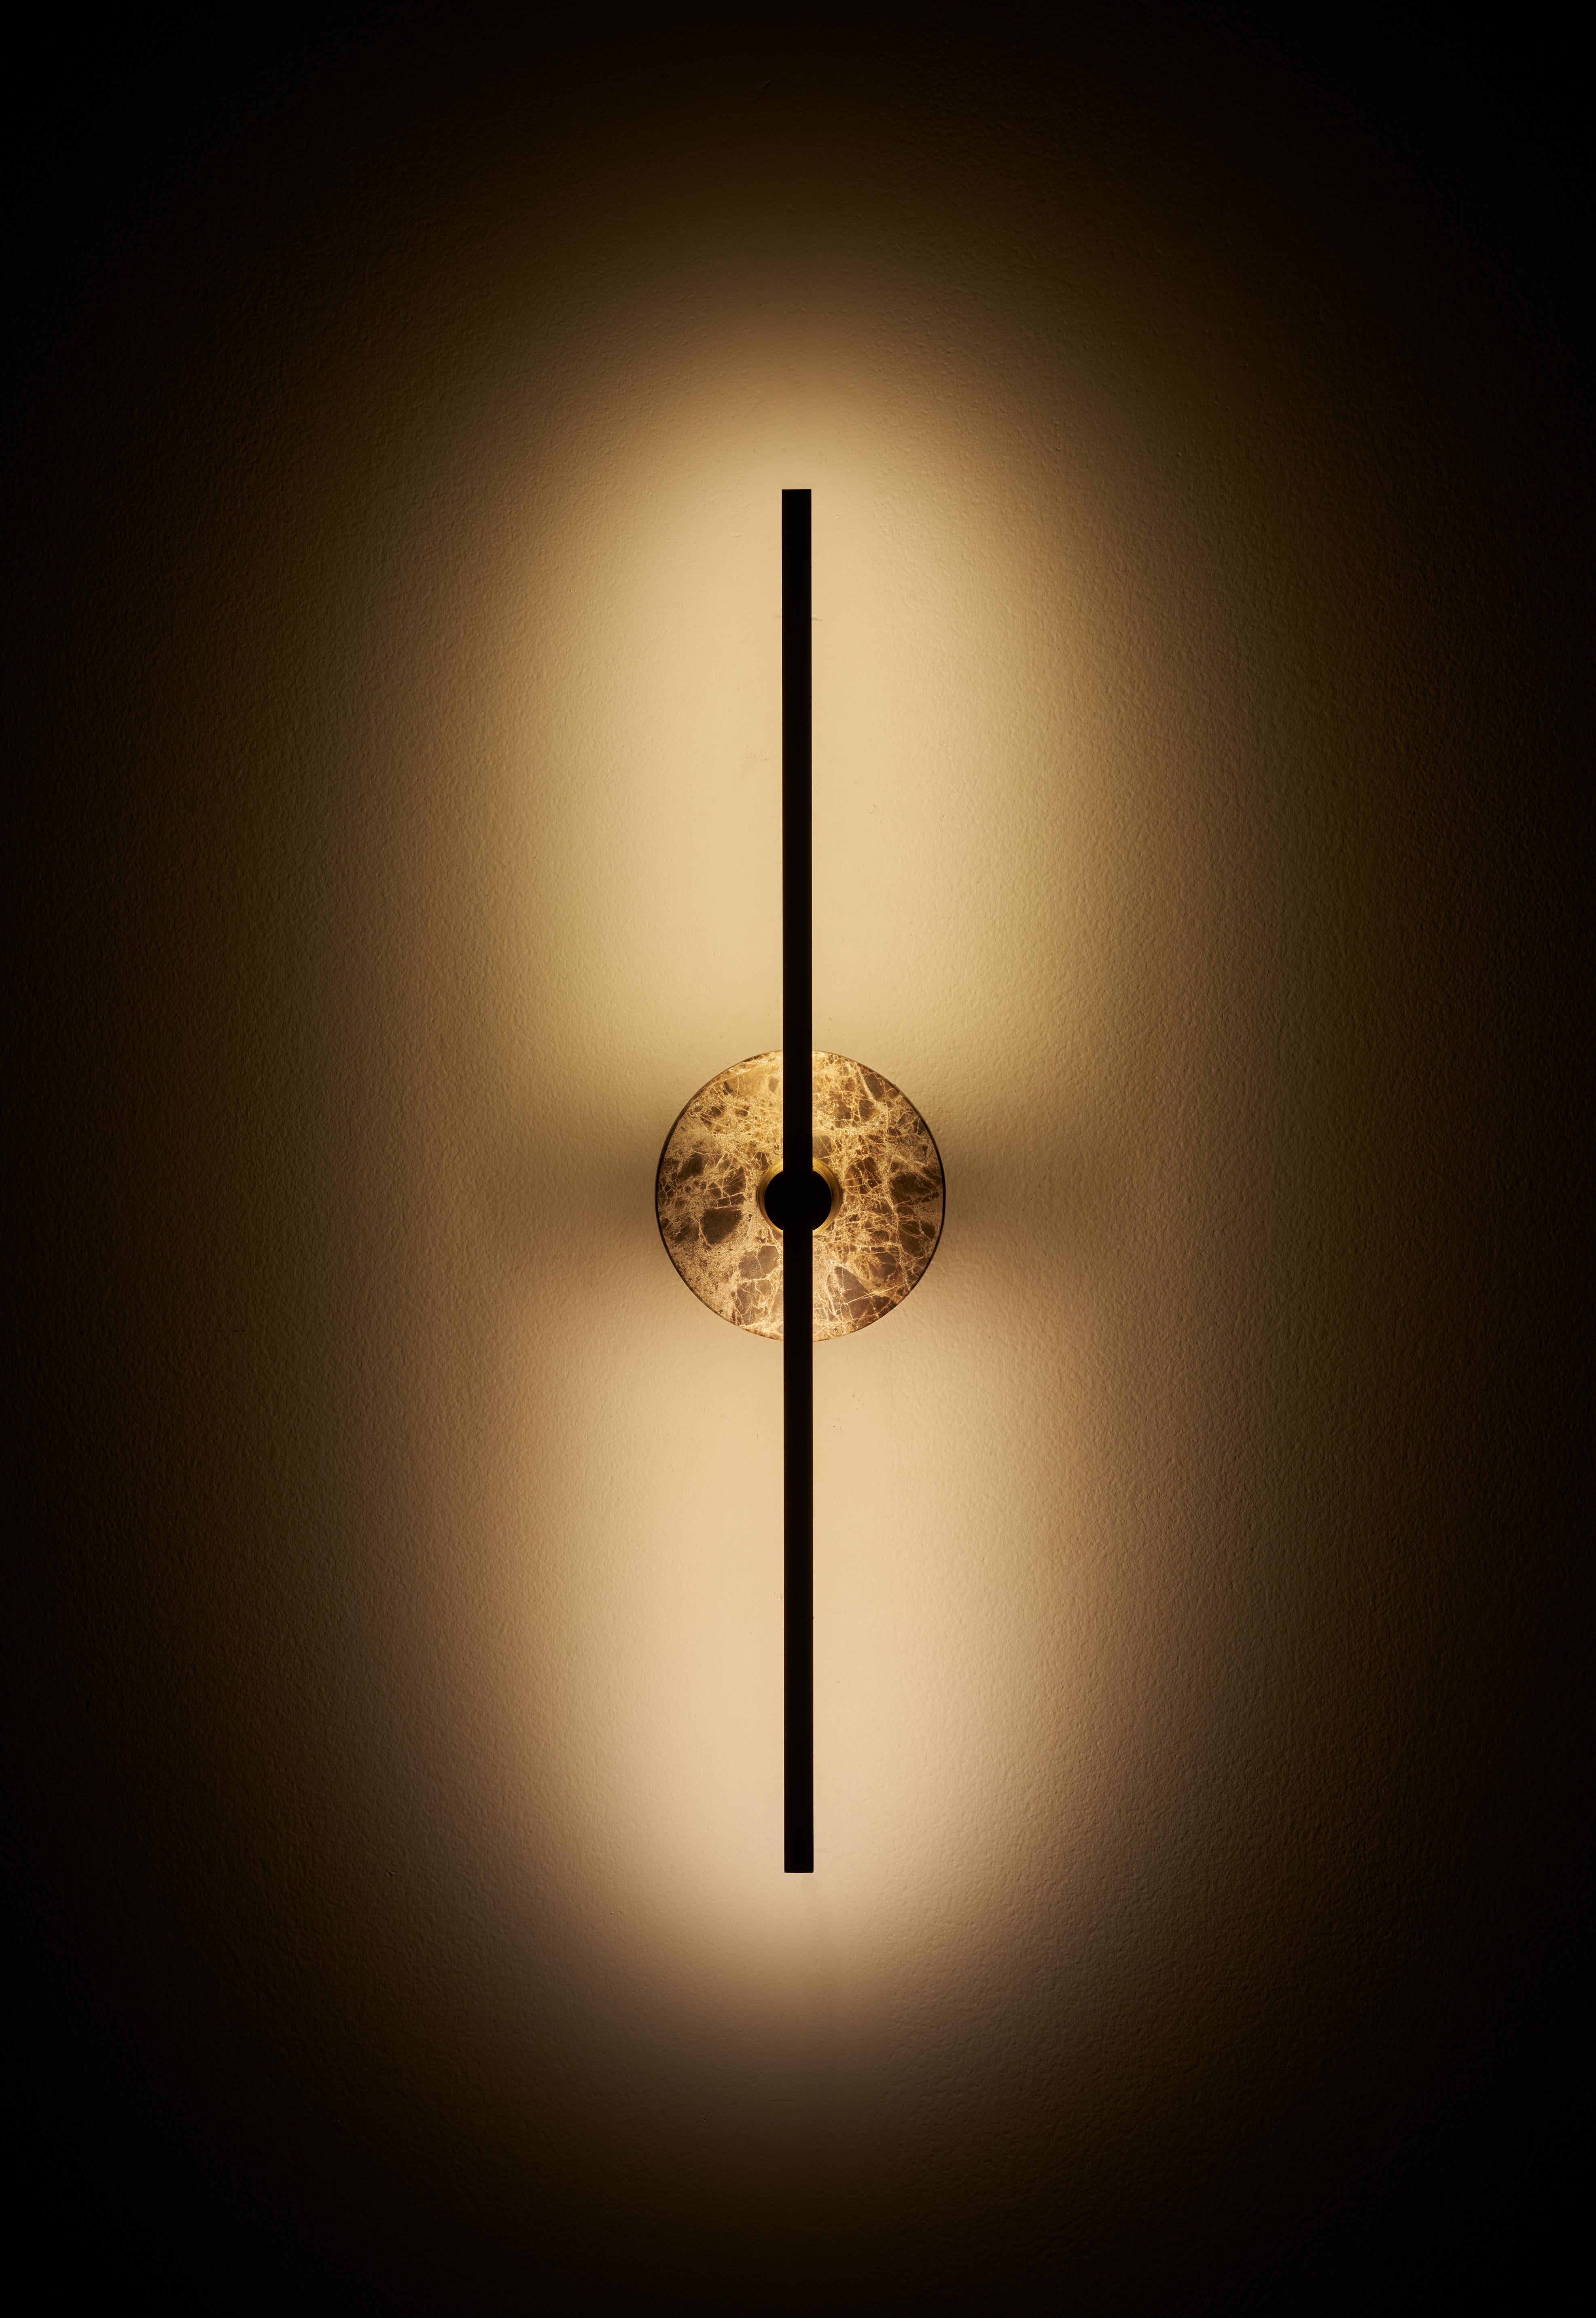 The Stick wall sconce is a contemporary lighting fixture that features a minimalist design with thin brass profiles and advanced LED technology. It emits a warm and diffused light that adds a cozy and inviting atmosphere to any room.

The brown